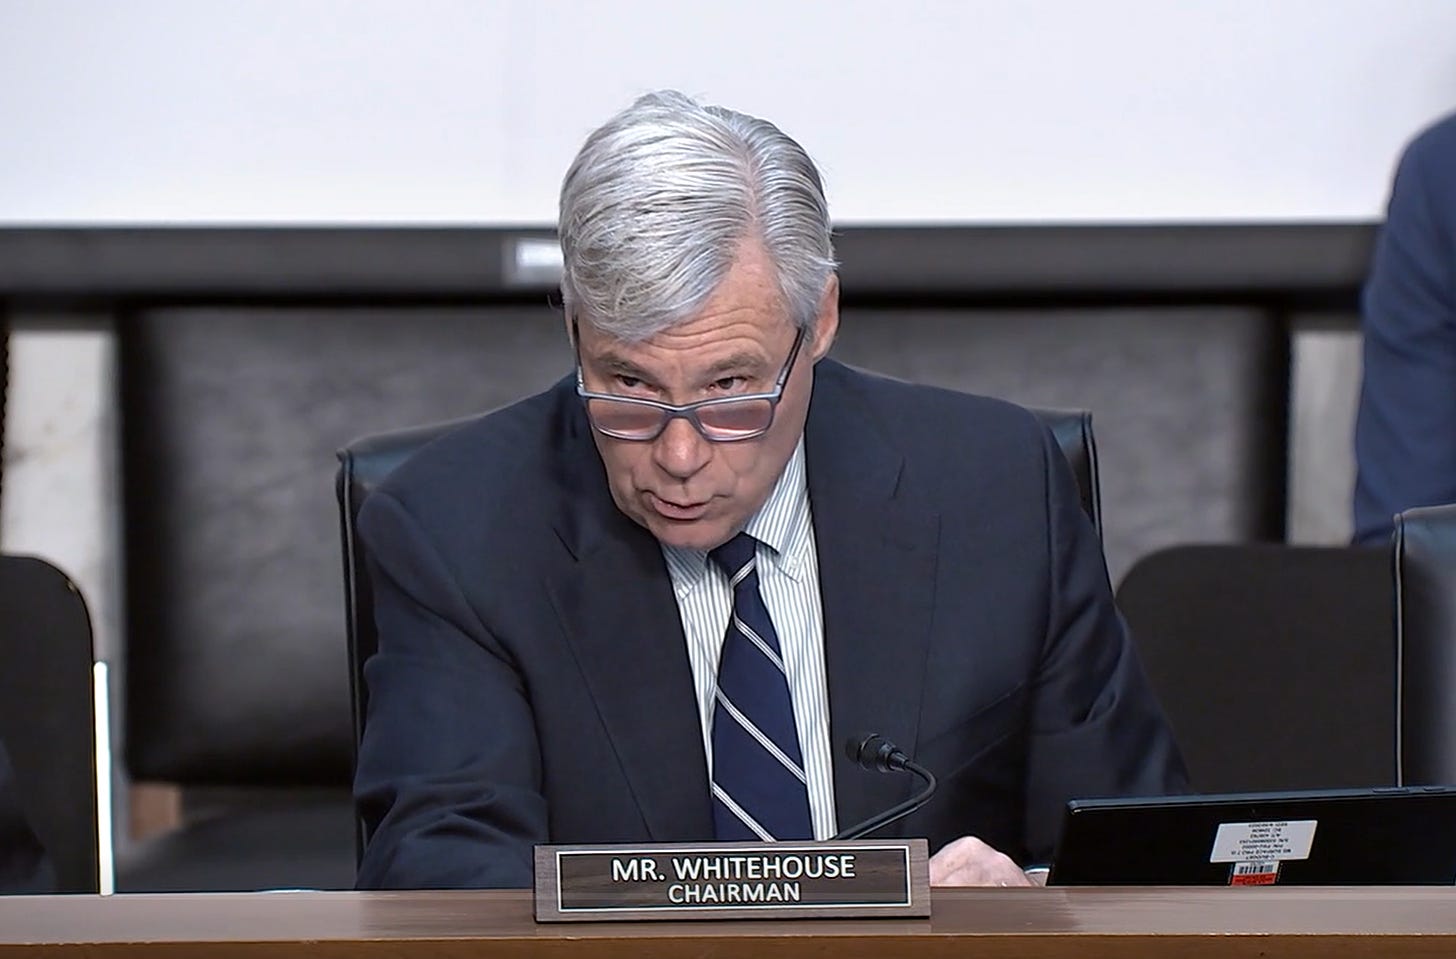 Wearing a dark blue suit, a US Senator with silver hair and glasses speaks at a desk. Before him is a plaque on which is written "Mr. Whitehouse, Chairman"